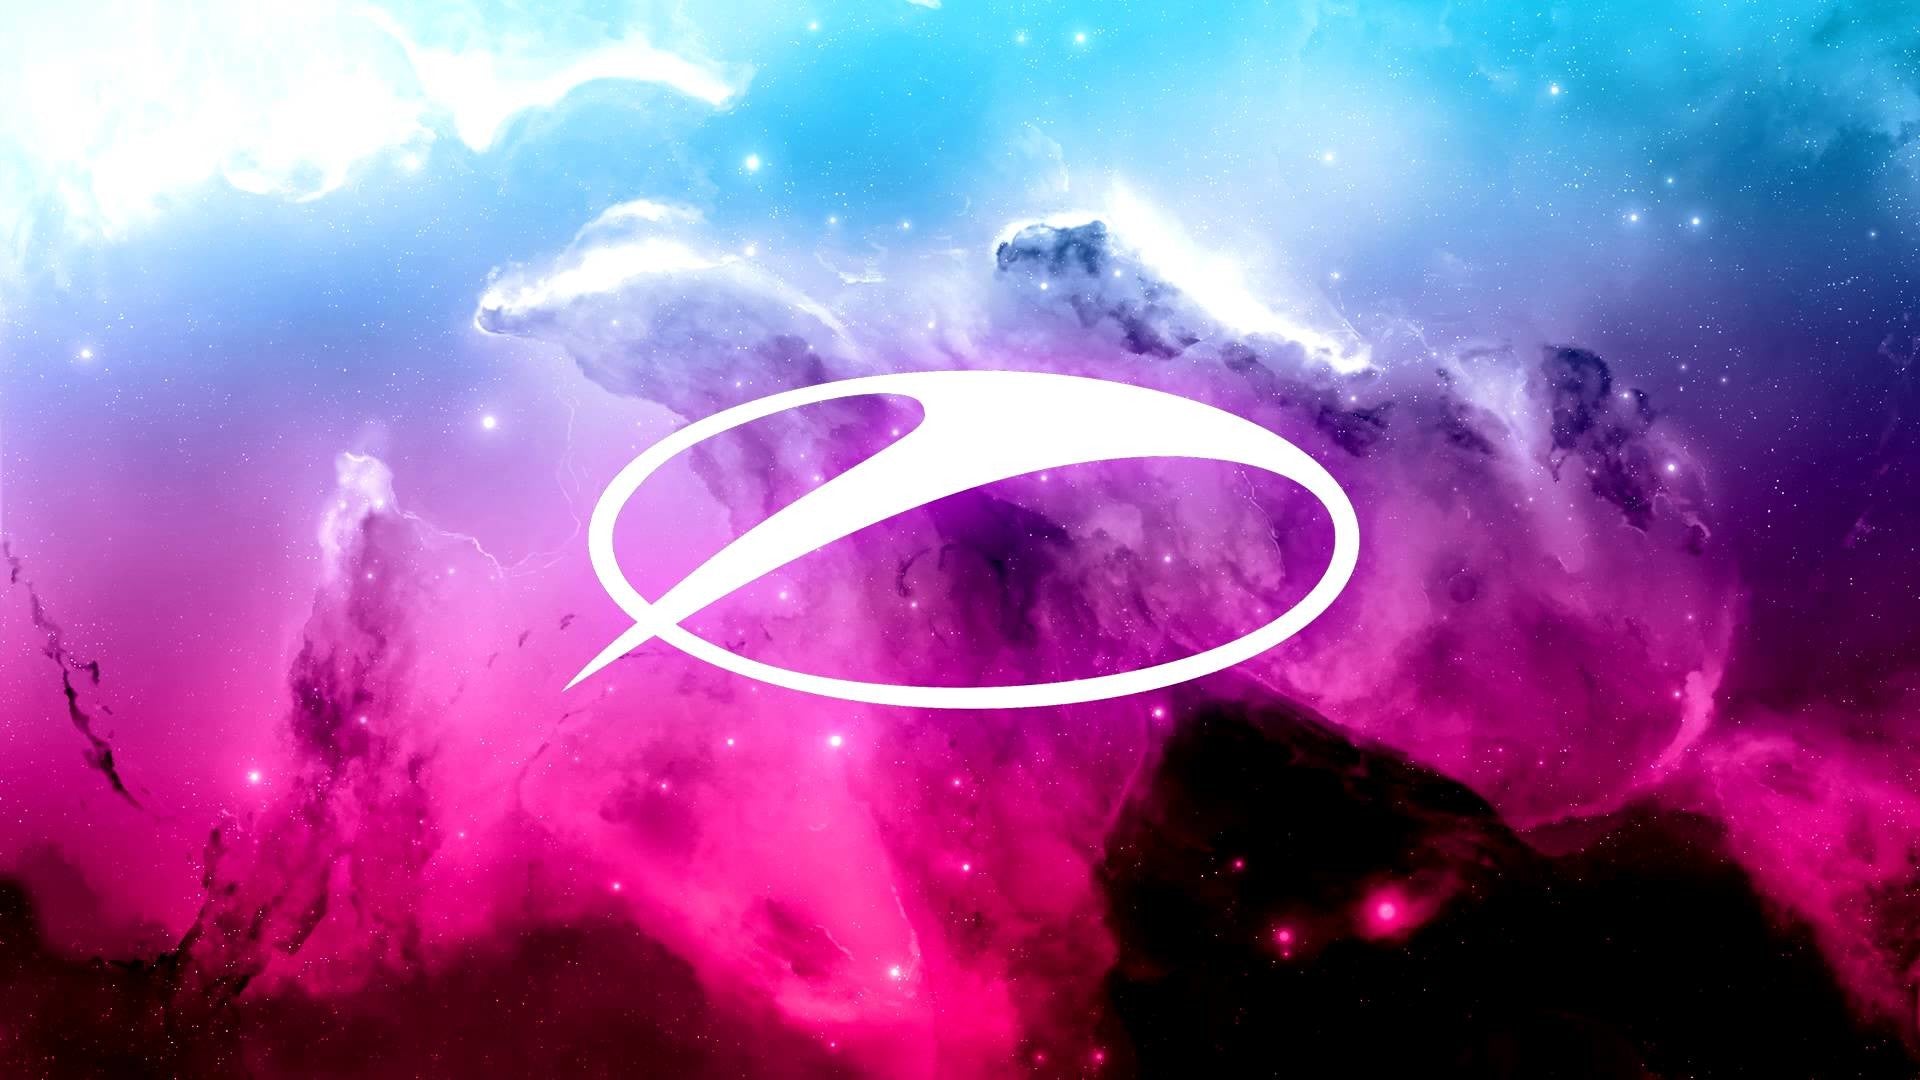 Complete Armin Van Buuren Yearly A State of Trance ASOT Shows DJ-Sets Compilation (2003)